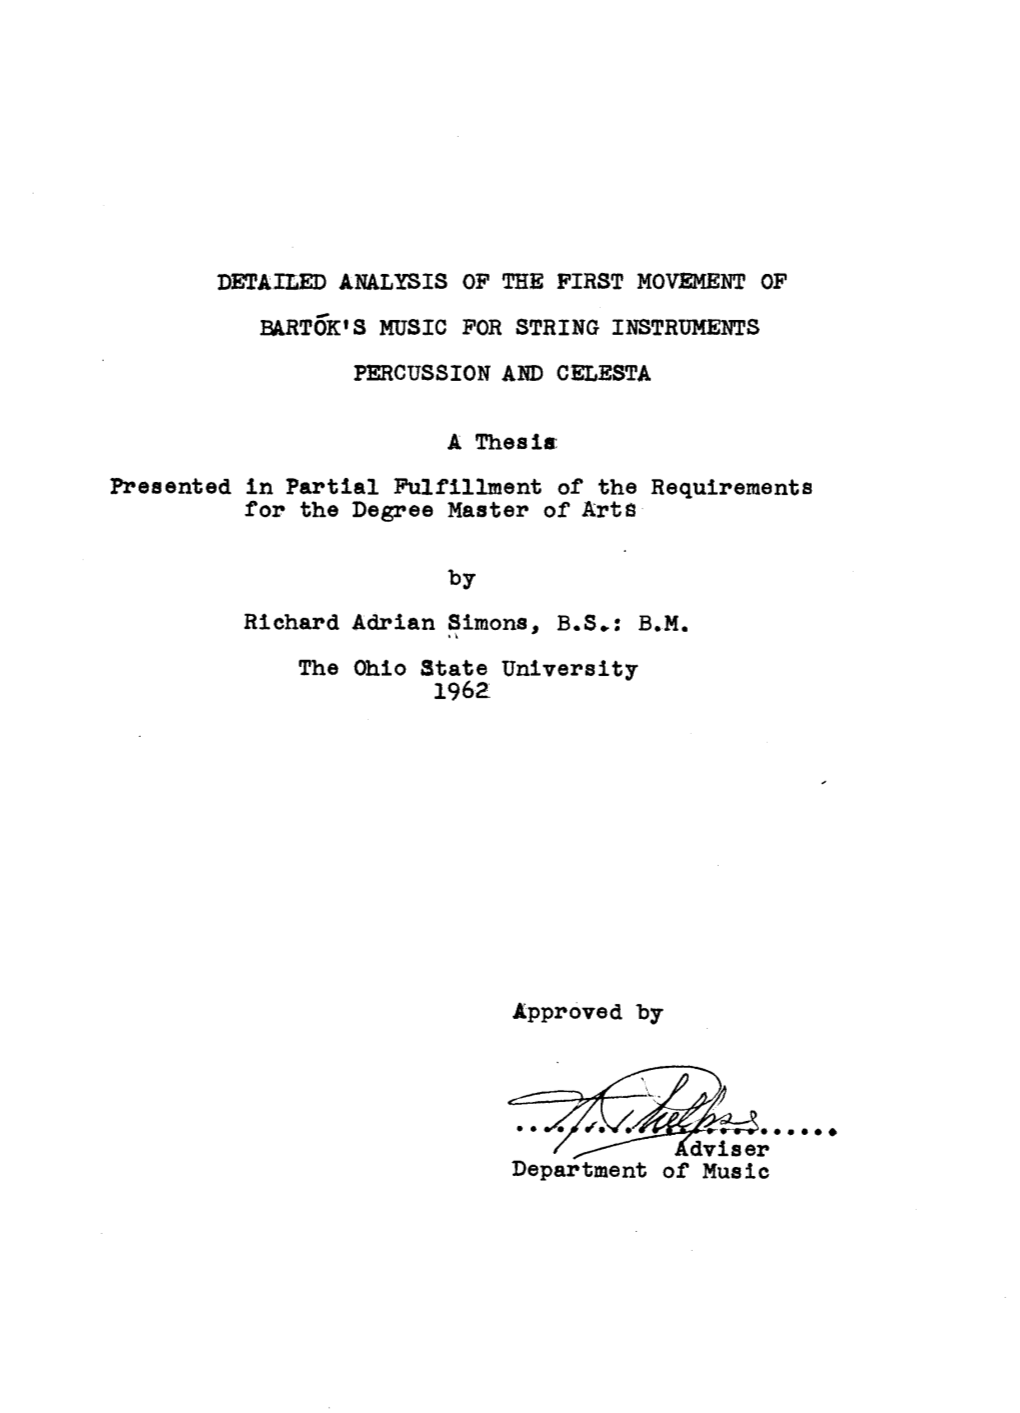 A Thesis: Presented in Partial Fulfillment of the Requirements for the Degree Master of Arts